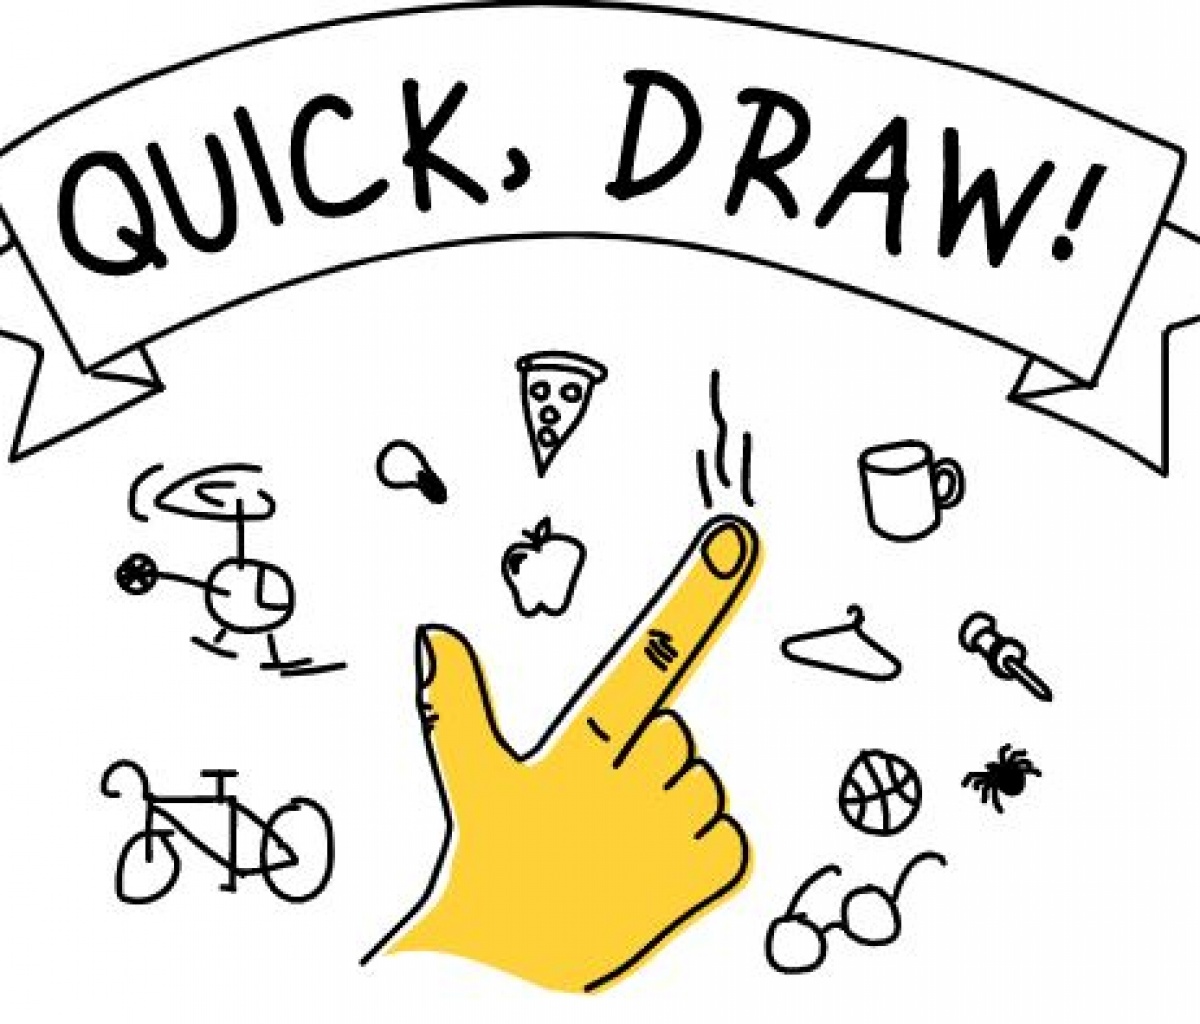 Finger drawing objects